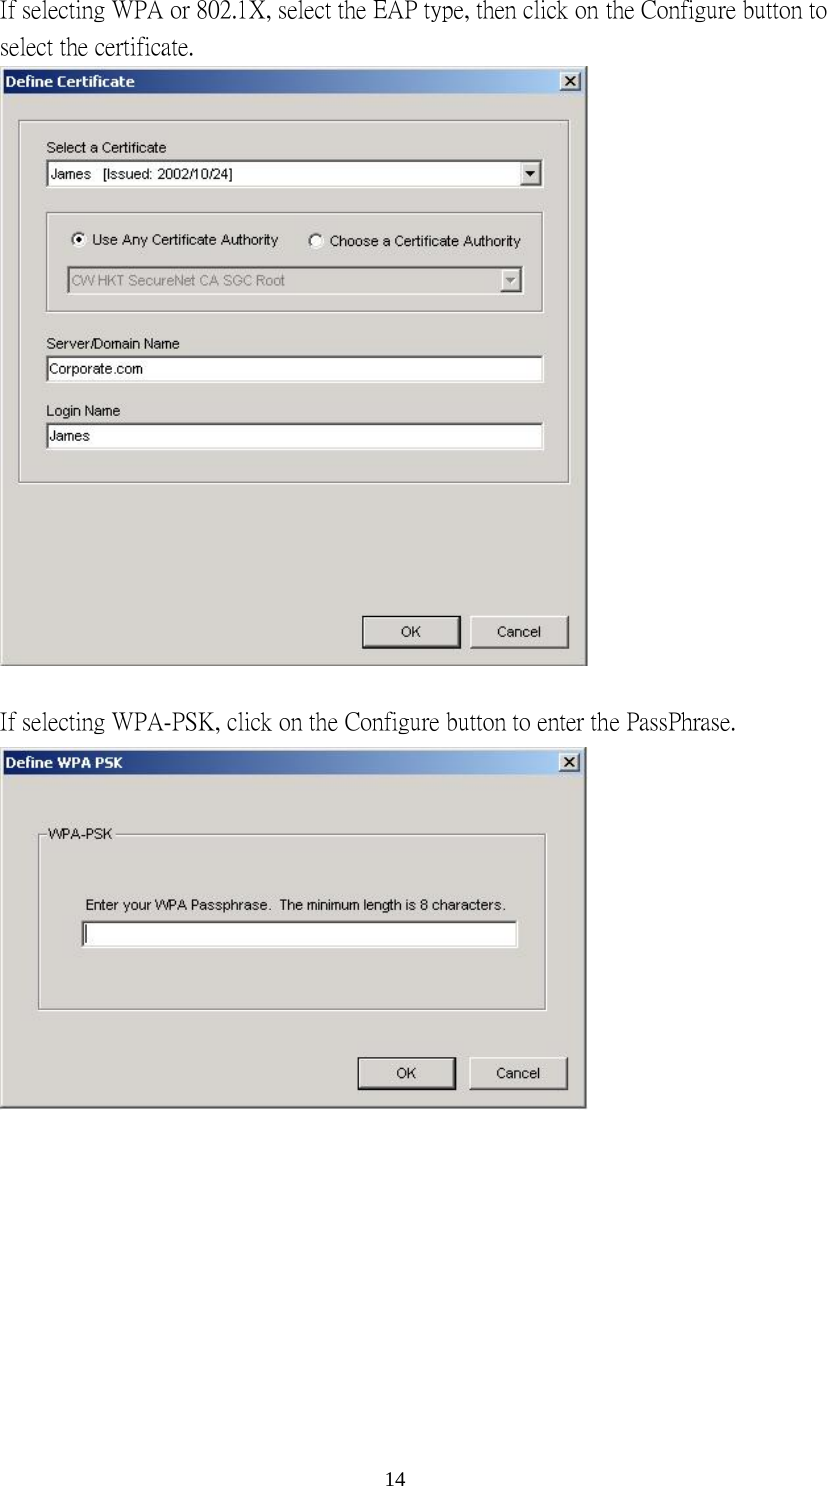  14If selecting WPA or 802.1X, select the EAP type, then click on the Configure button to select the certificate.   If selecting WPA-PSK, click on the Configure button to enter the PassPhrase.   